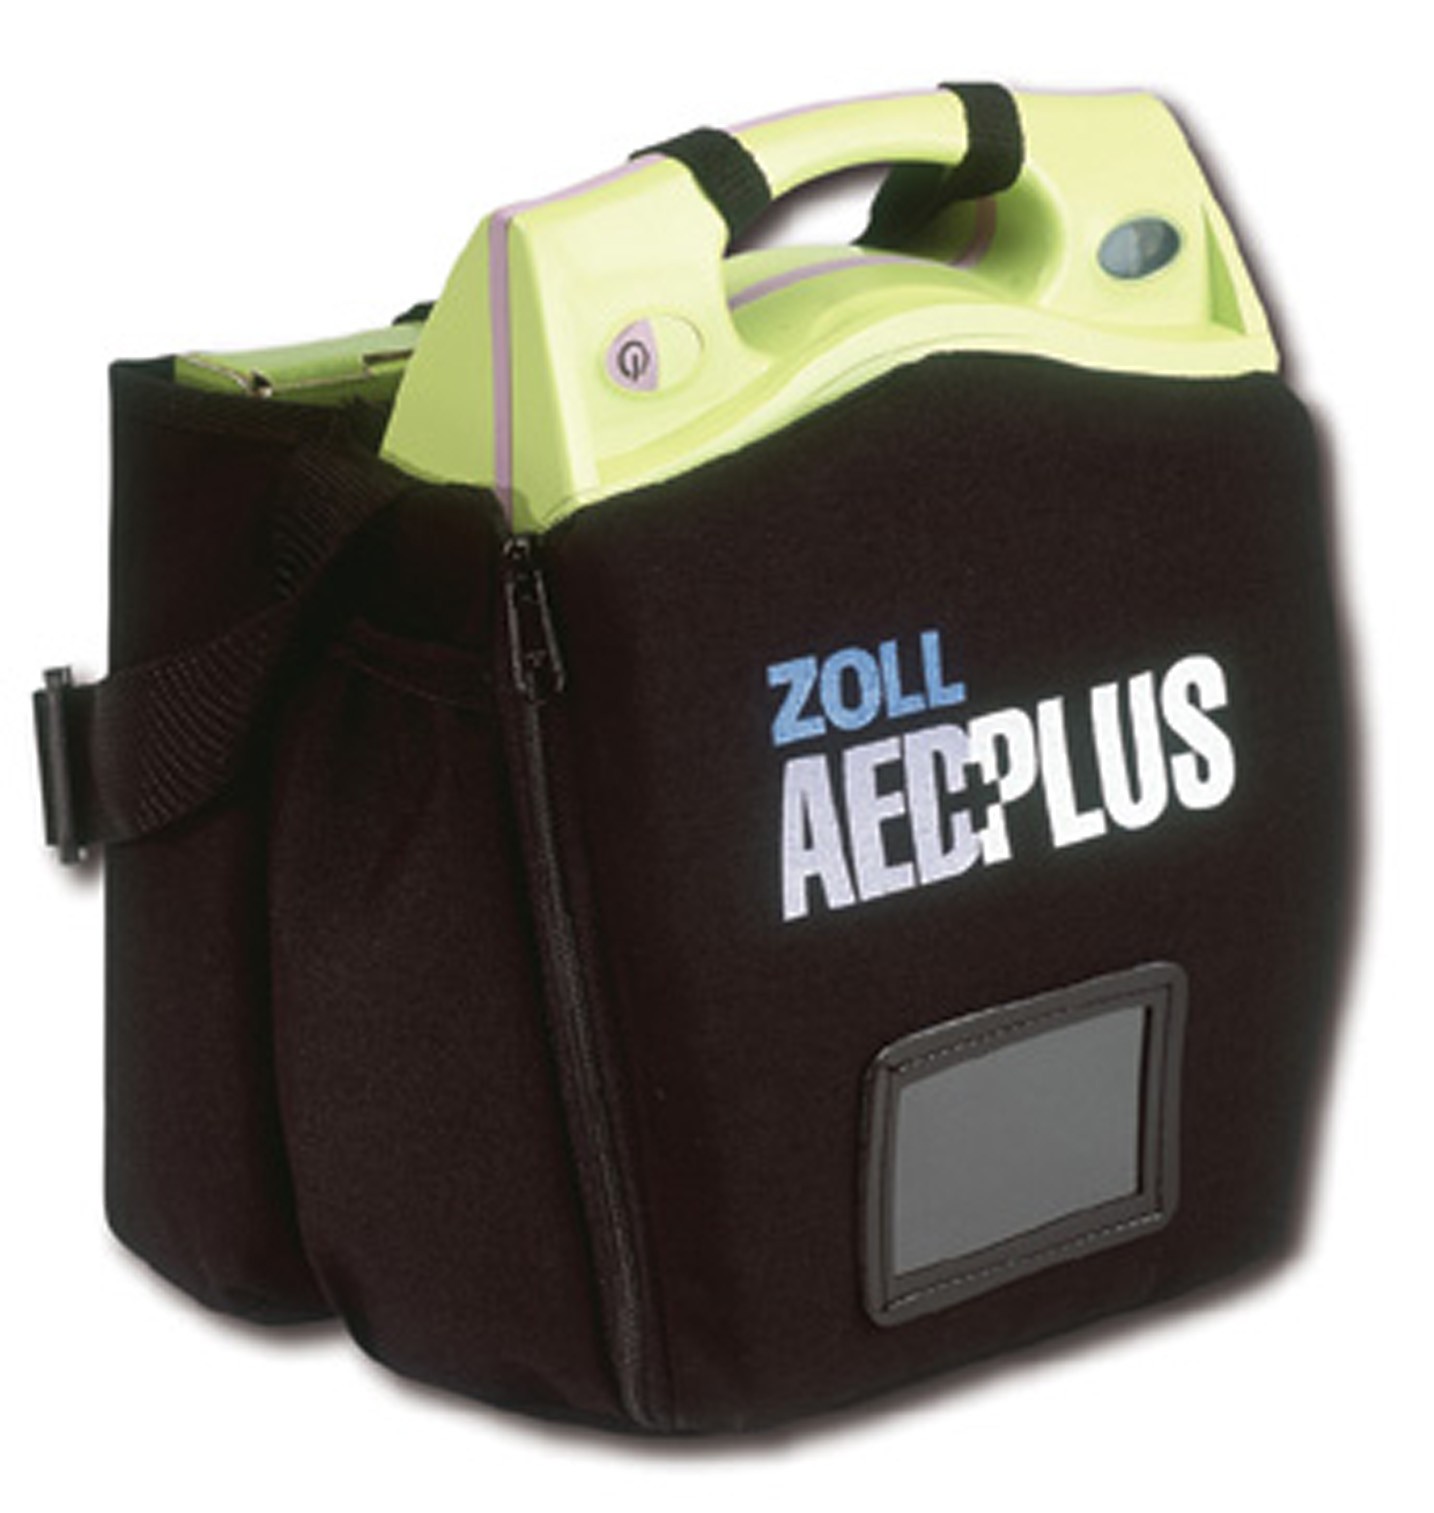 ZOLL AED Plus Package with Cabinet image